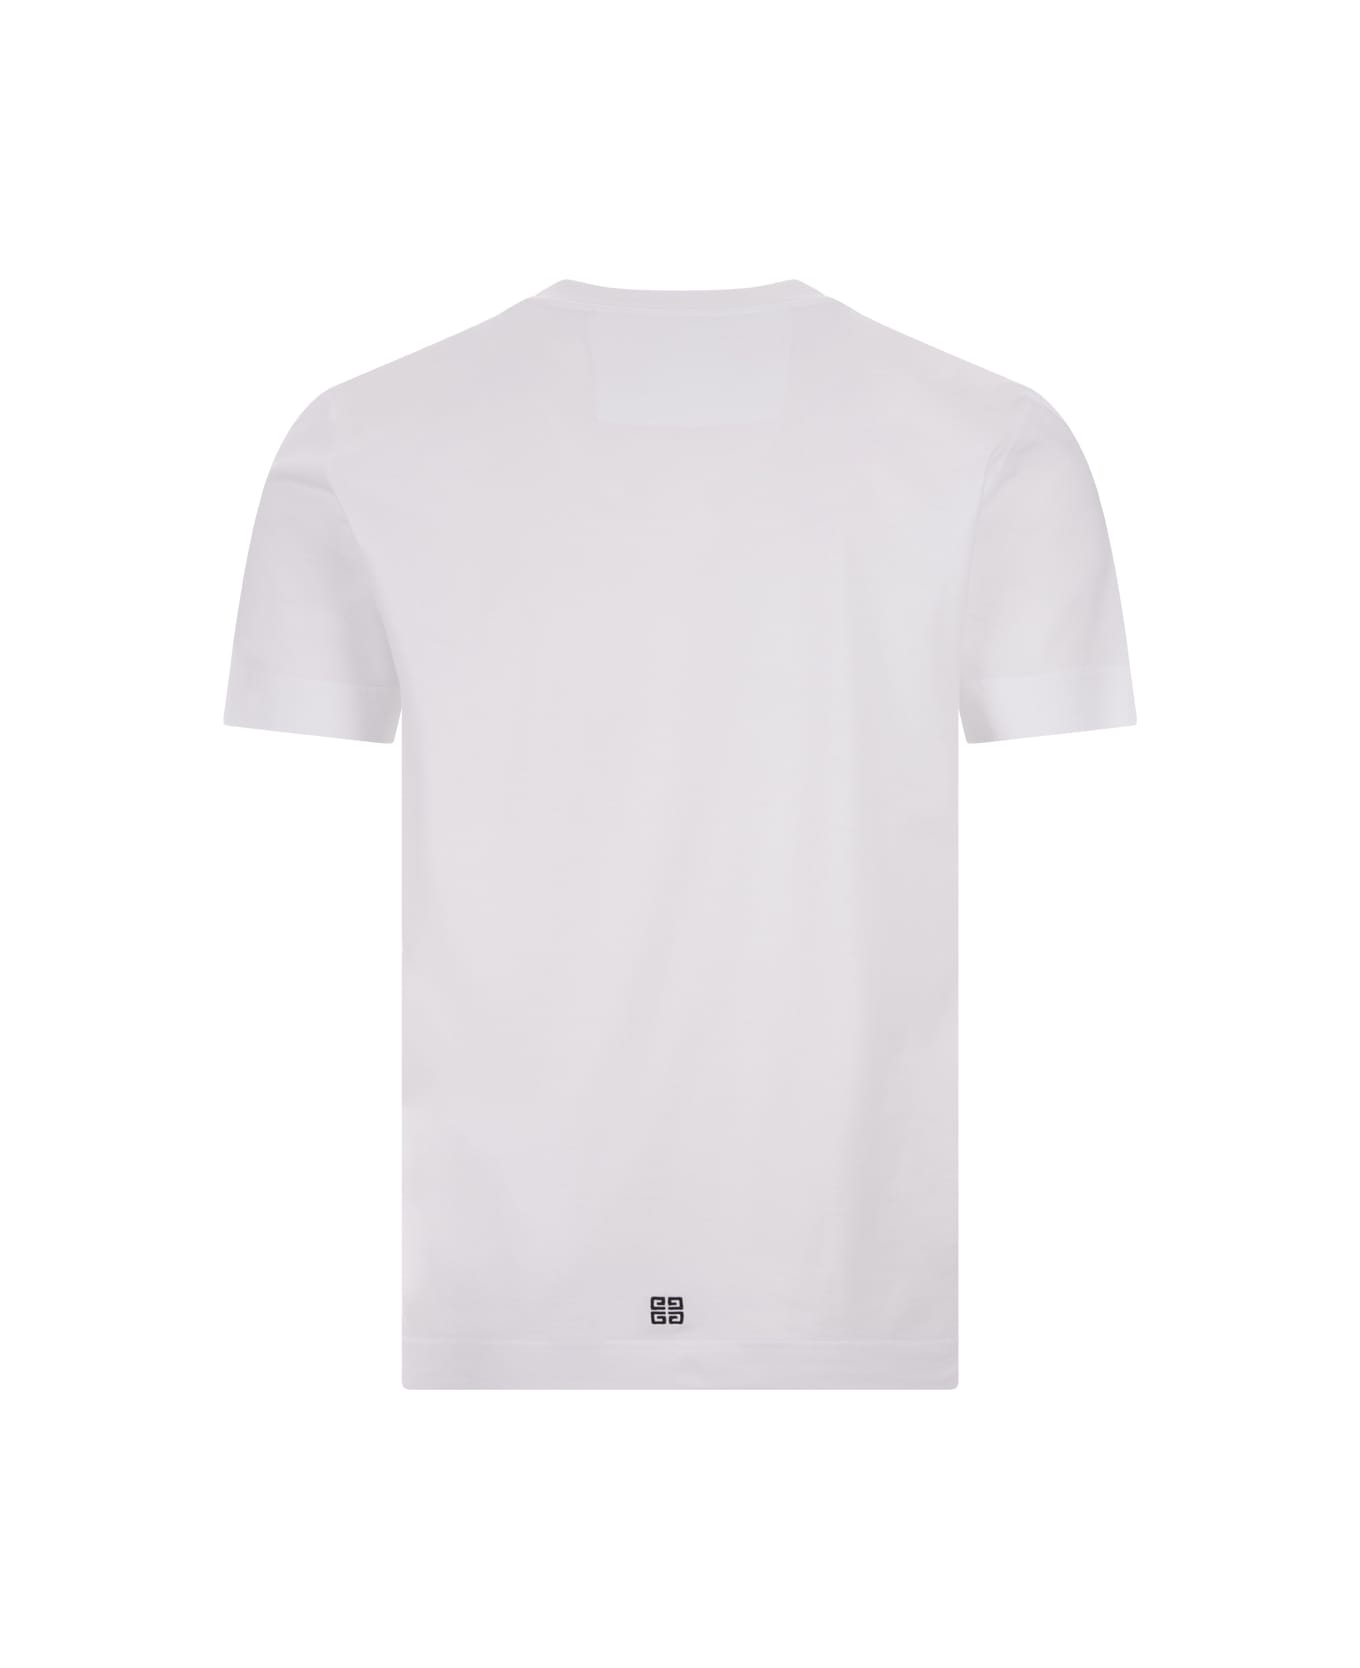 Givenchy 1952 Slim T-shirt In White Cotton - White